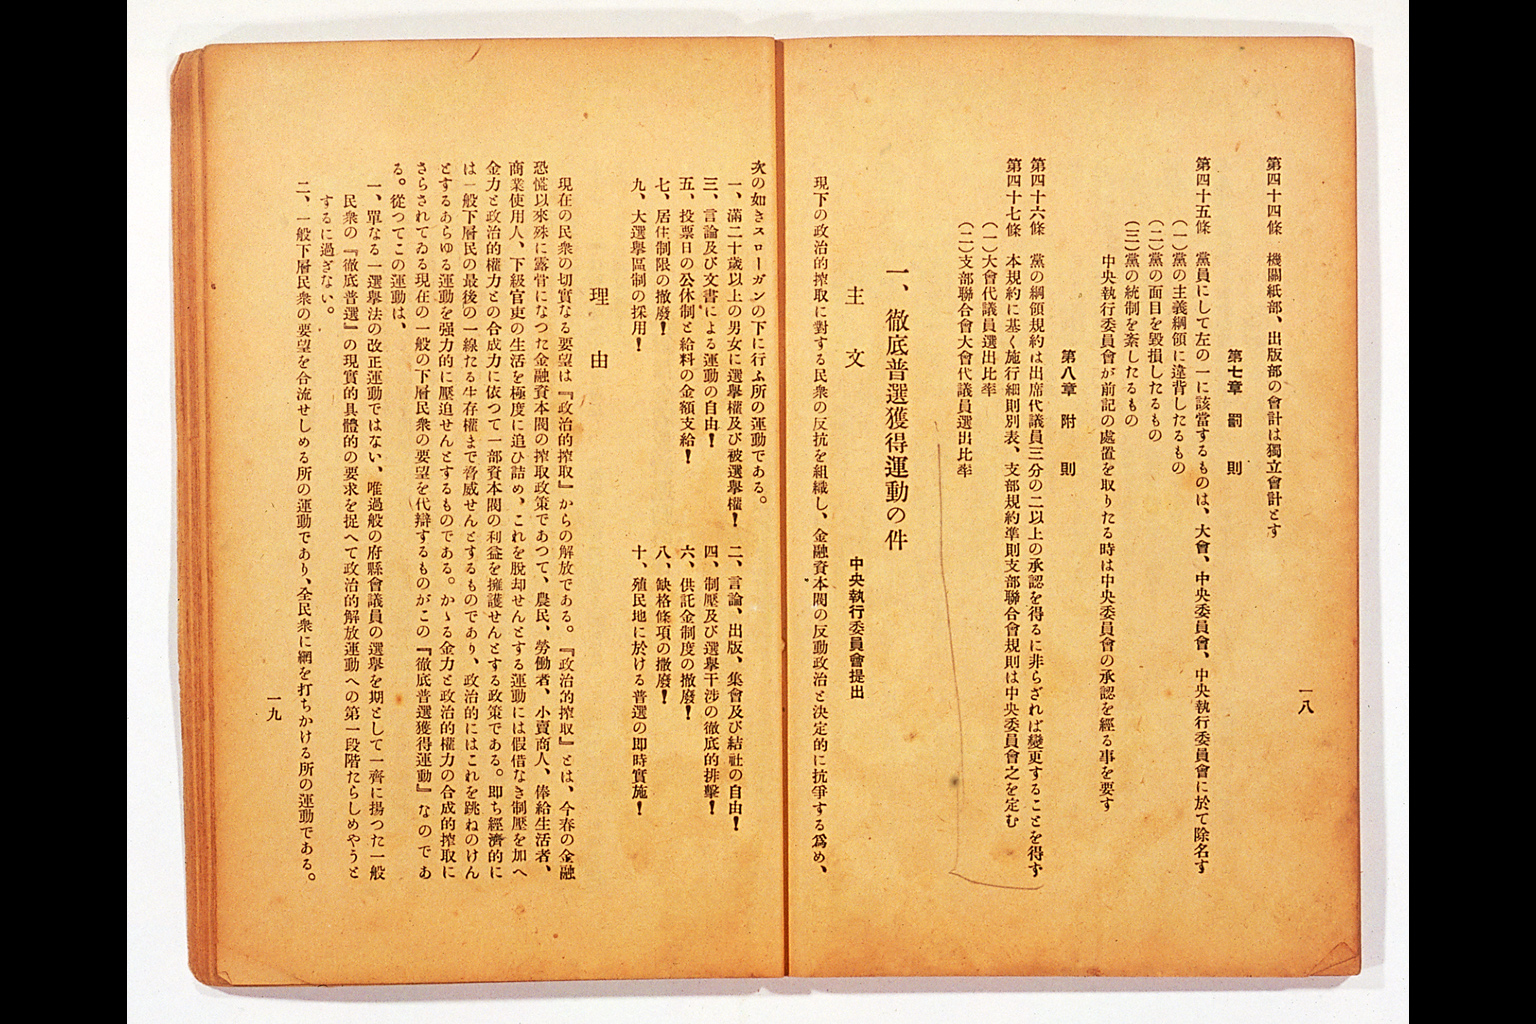 Measure and Report of the Japan Ronoto Party Headquarters, Presented at Its First National Convention(larger)